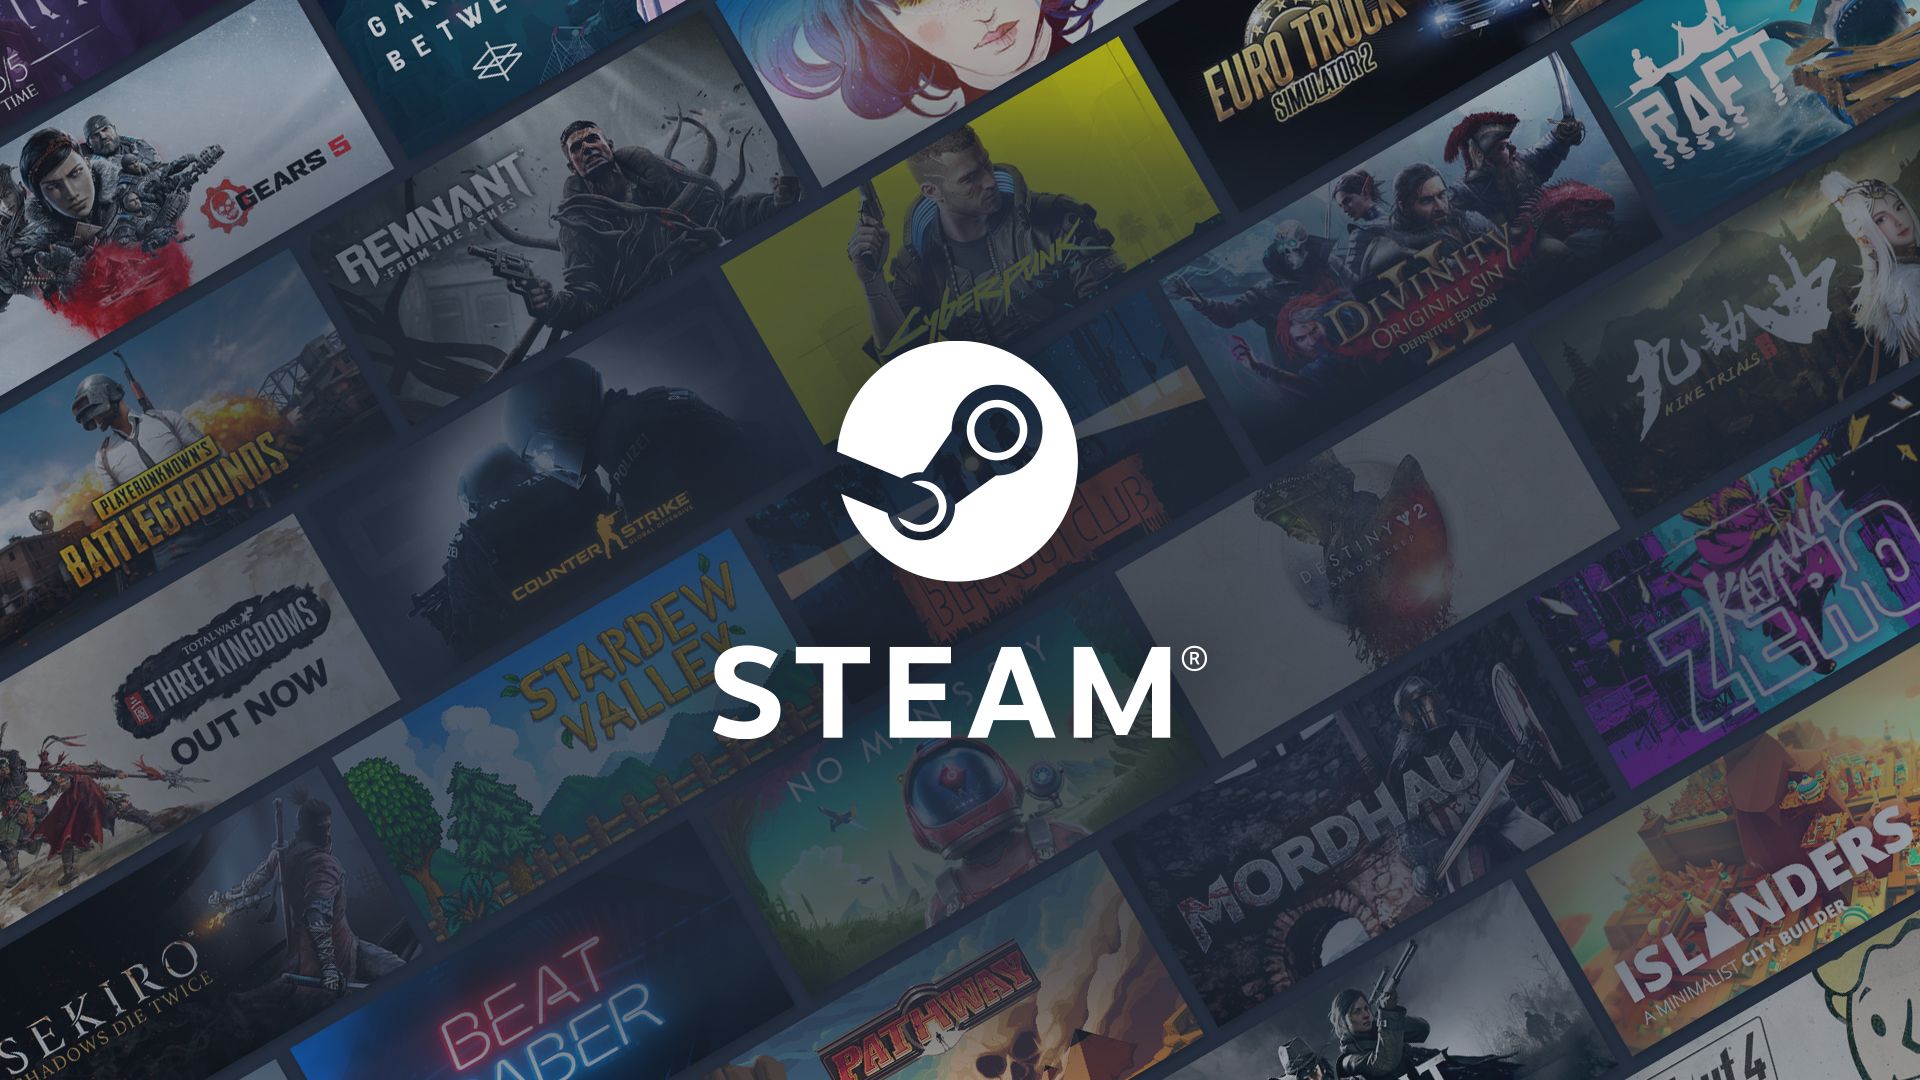 Top tips and tricks to mastering the Steam platform